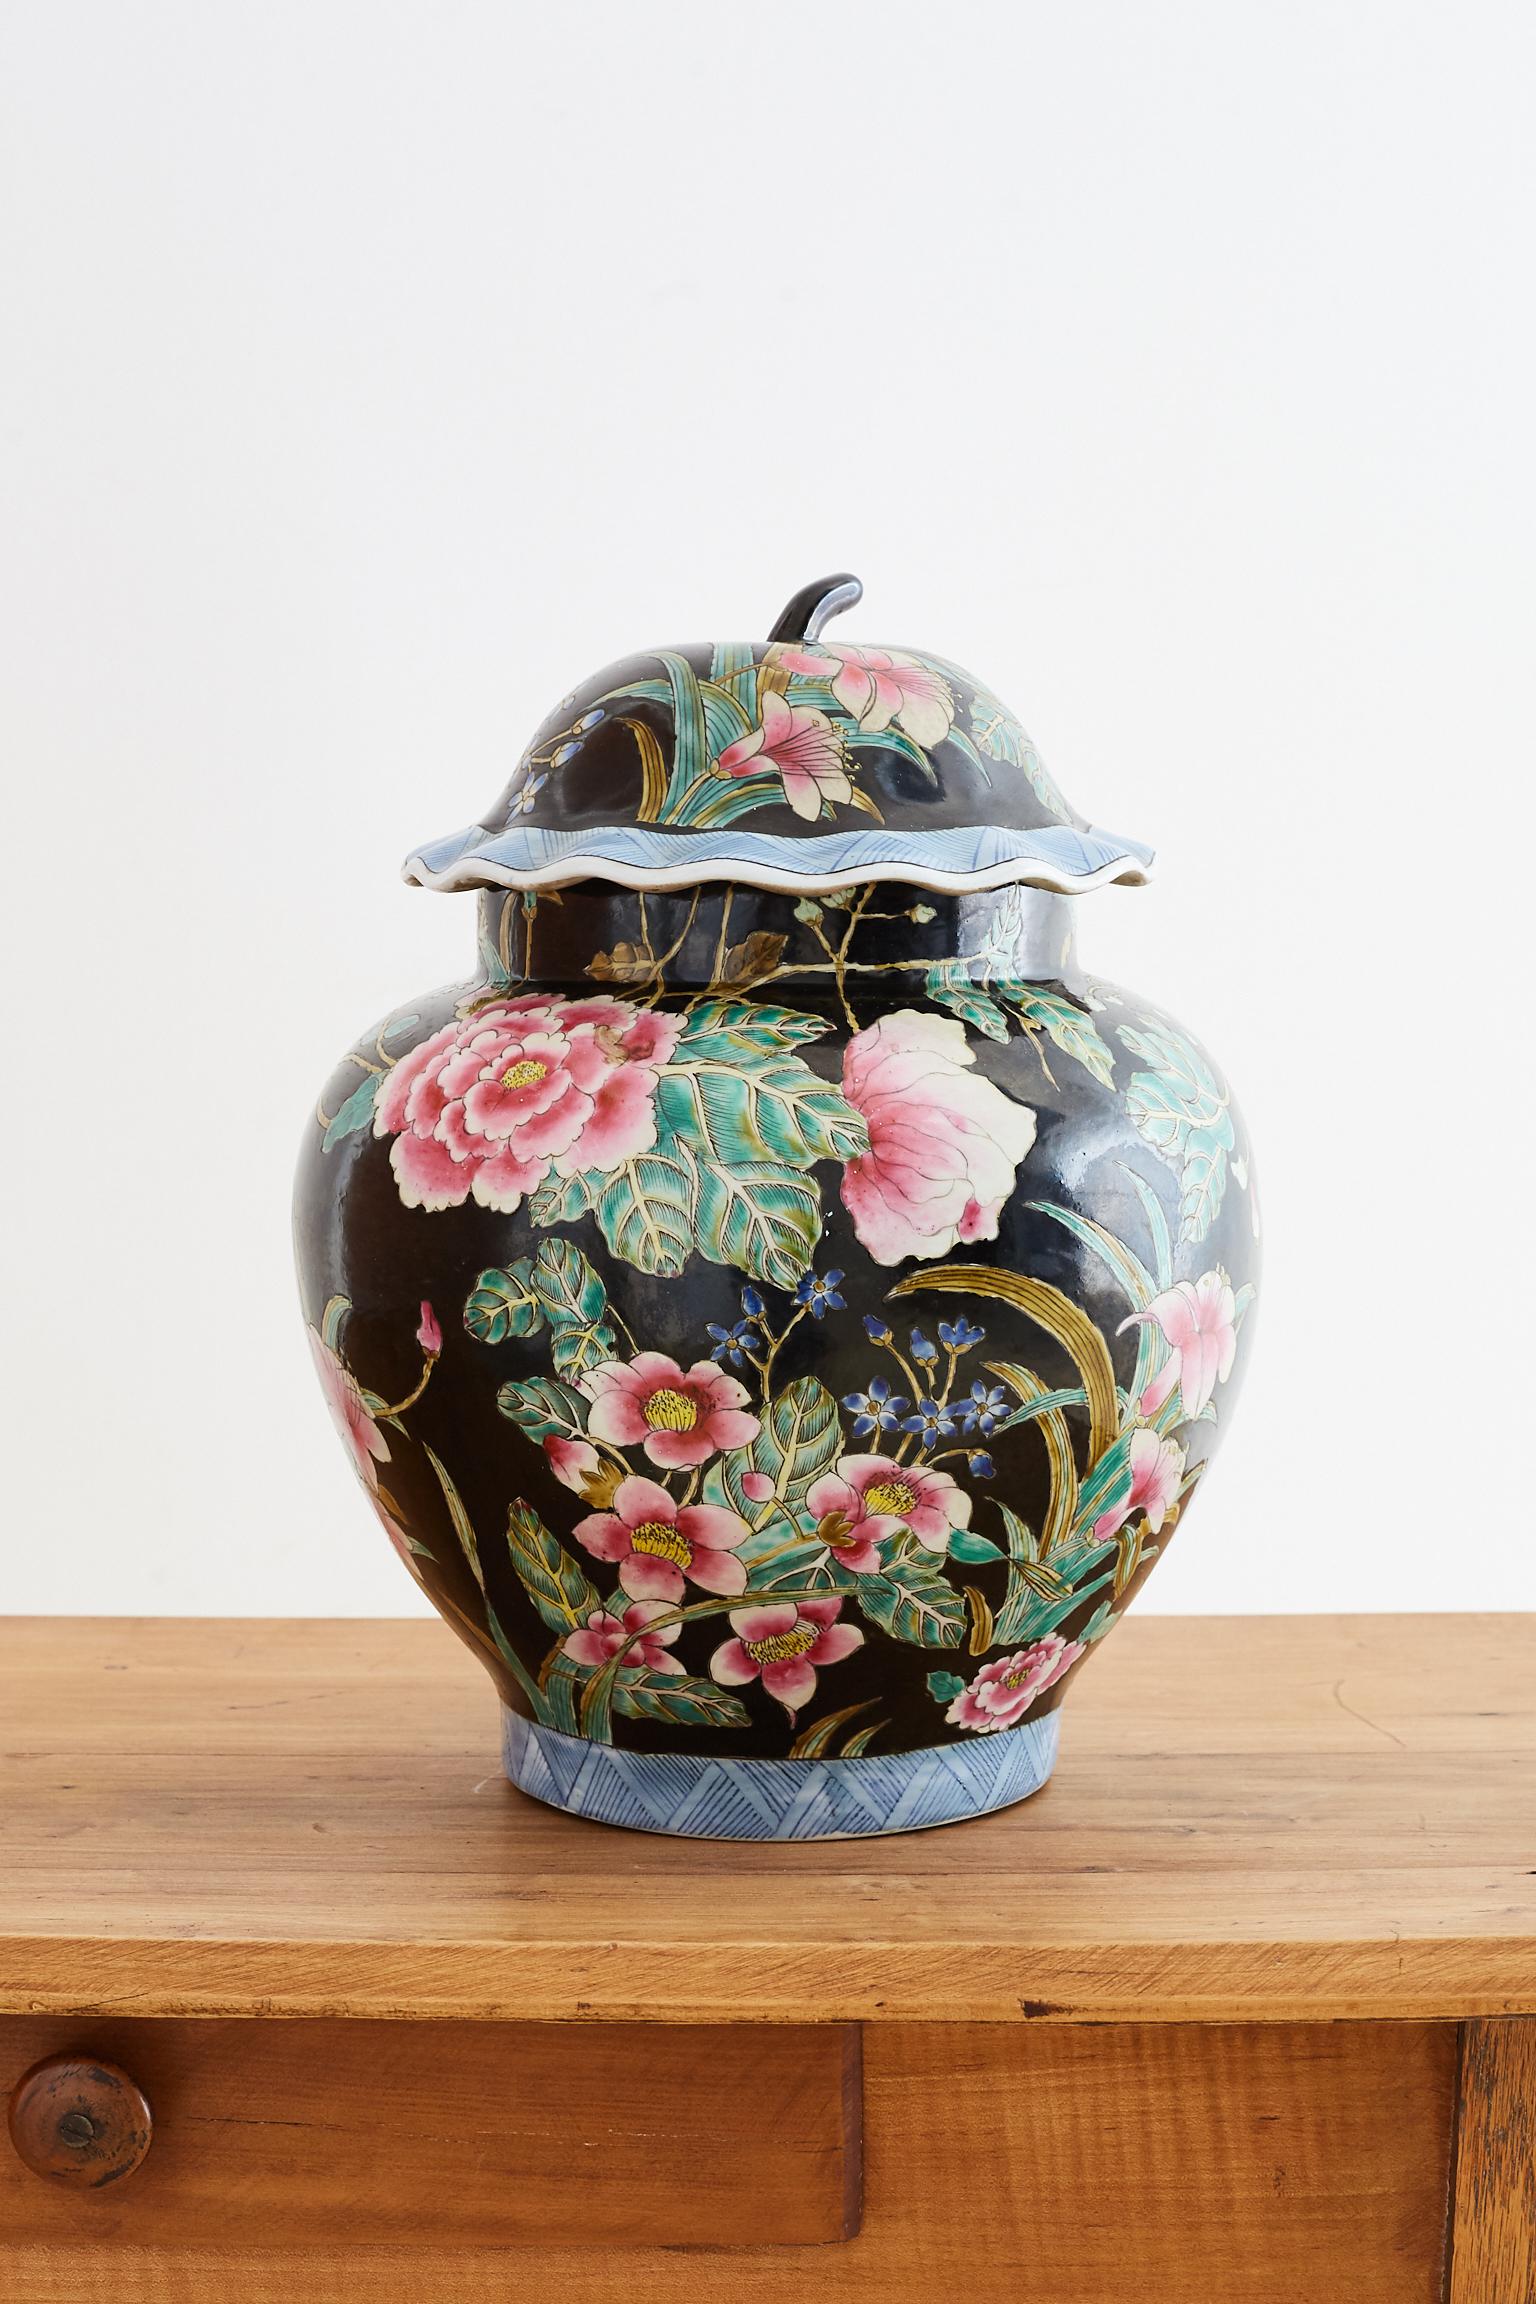 Colorful Chinese export famille noir porcelain ginger jar. Features an array of Famille Rose colors over a black ground with a matching lid. The lid and bottom of vase have a blue and white geometric pattern. The jar is decorated with floral and